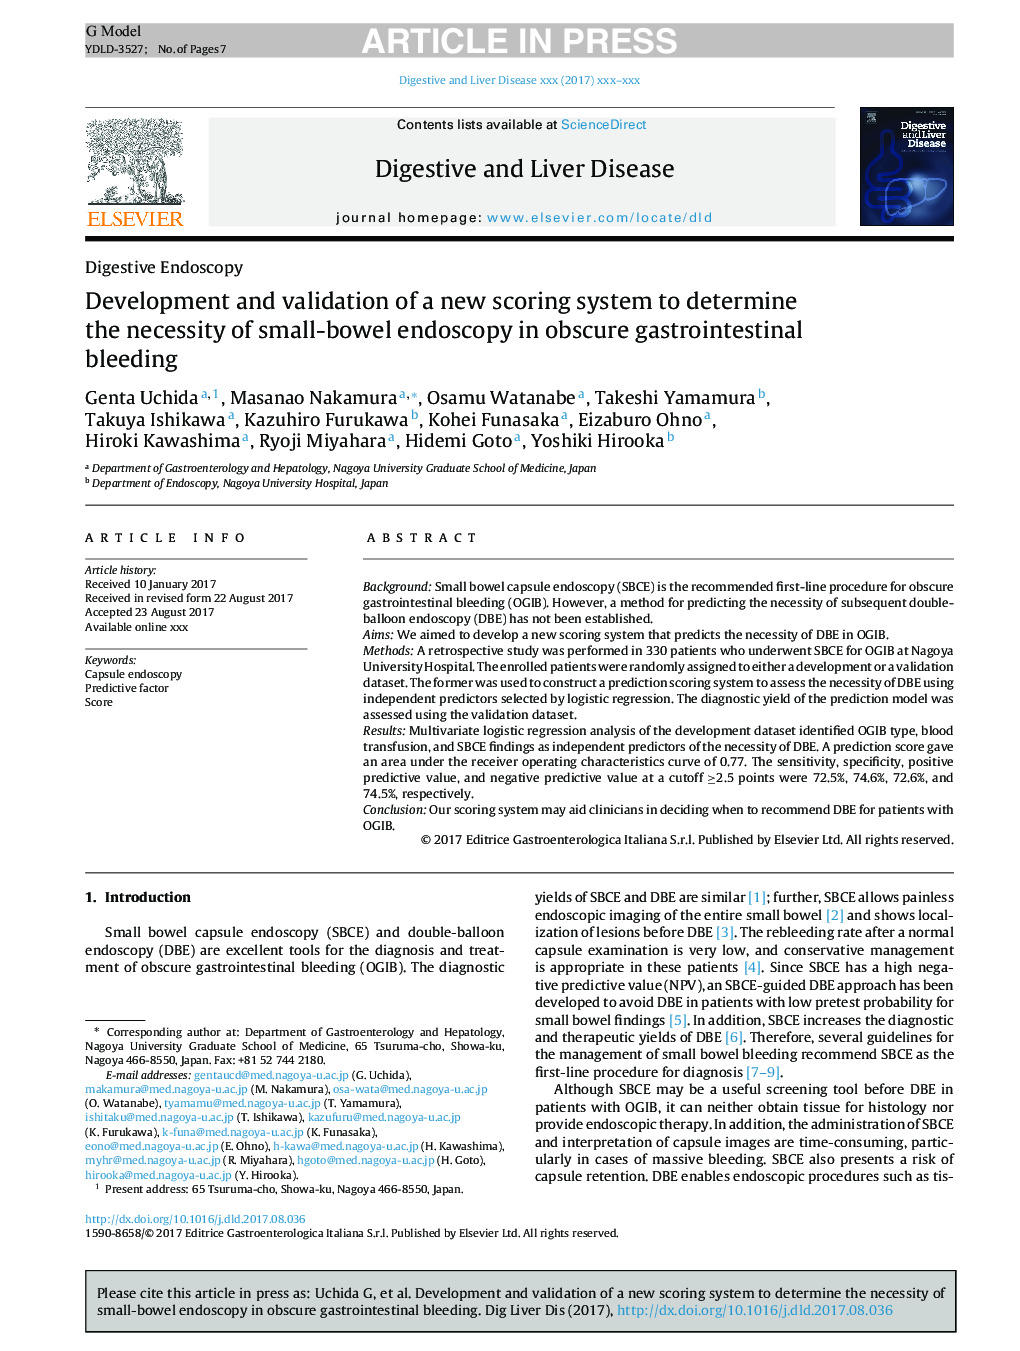 Development and validation of a new scoring system to determine the necessity of small-bowel endoscopy in obscure gastrointestinal bleeding